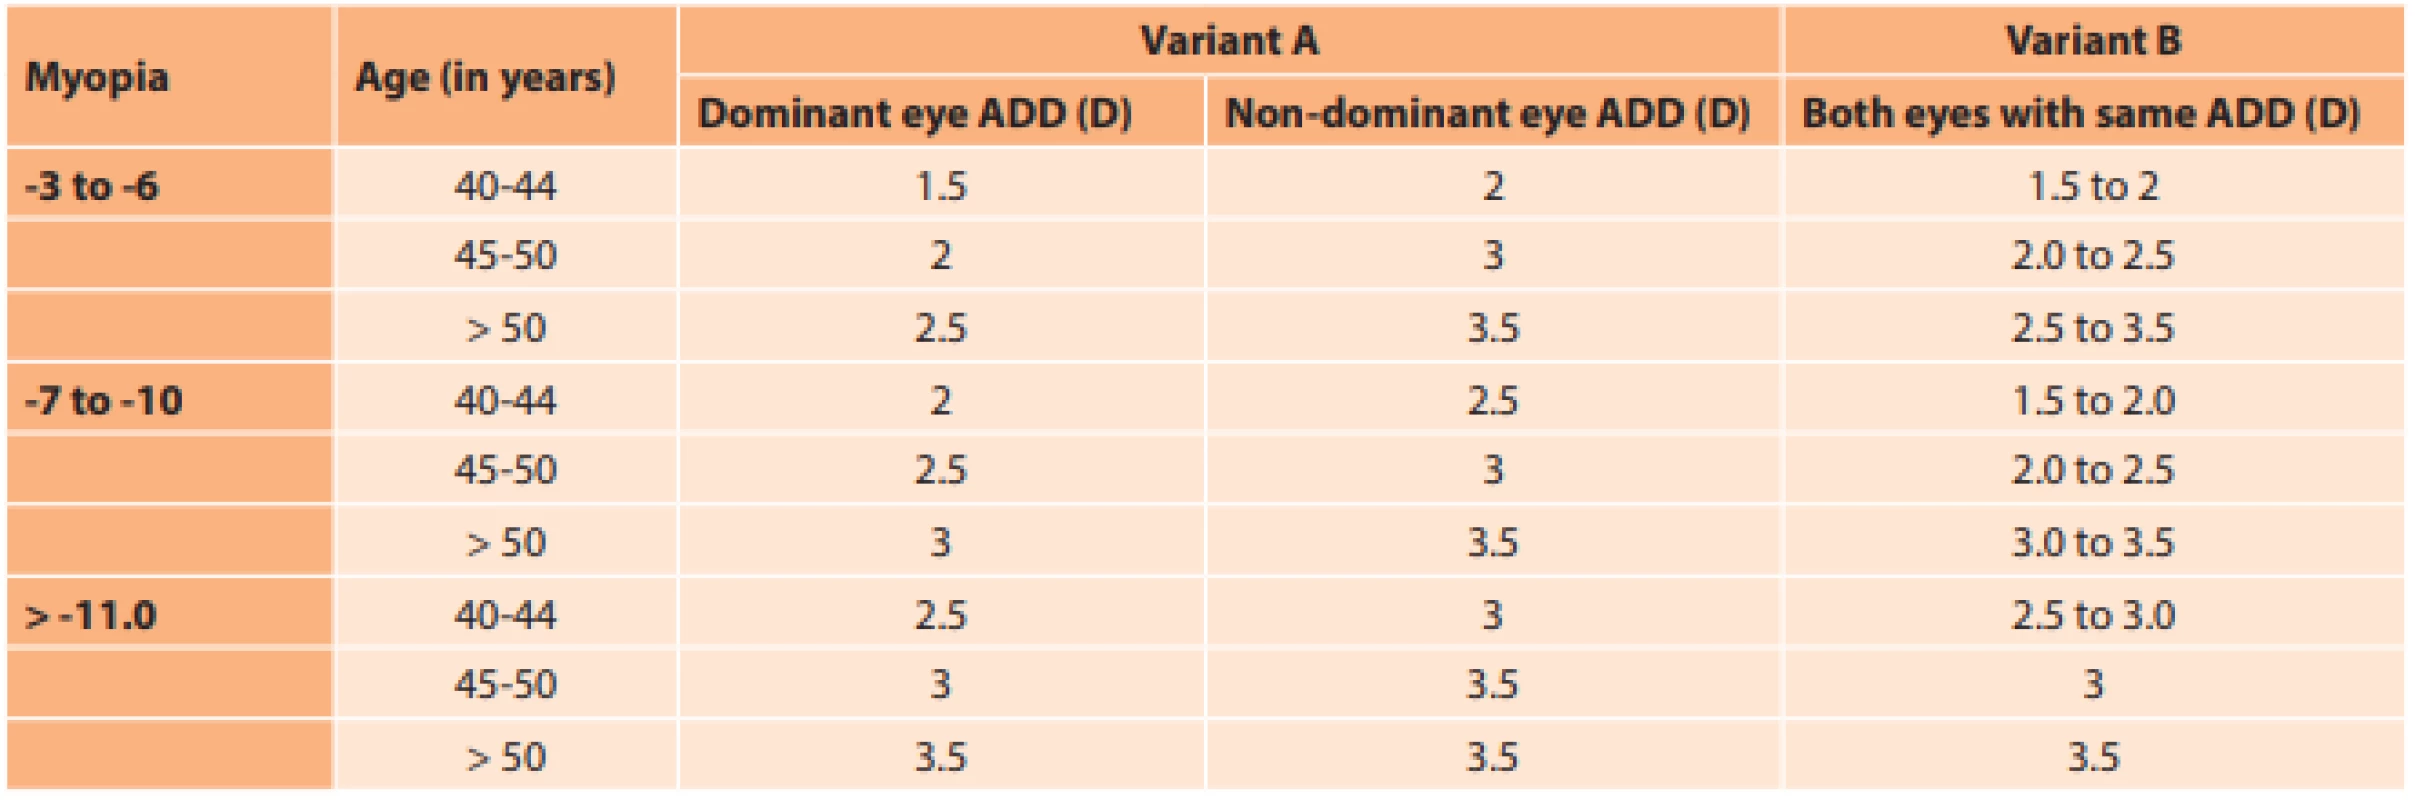 Nomogram for selection of best presbyopic addition (ADD) for each eye according to age, degree of myopia, condition of
dominant and non-dominant eye and patient tolerance (variant A and variant B). Dioptre (D)